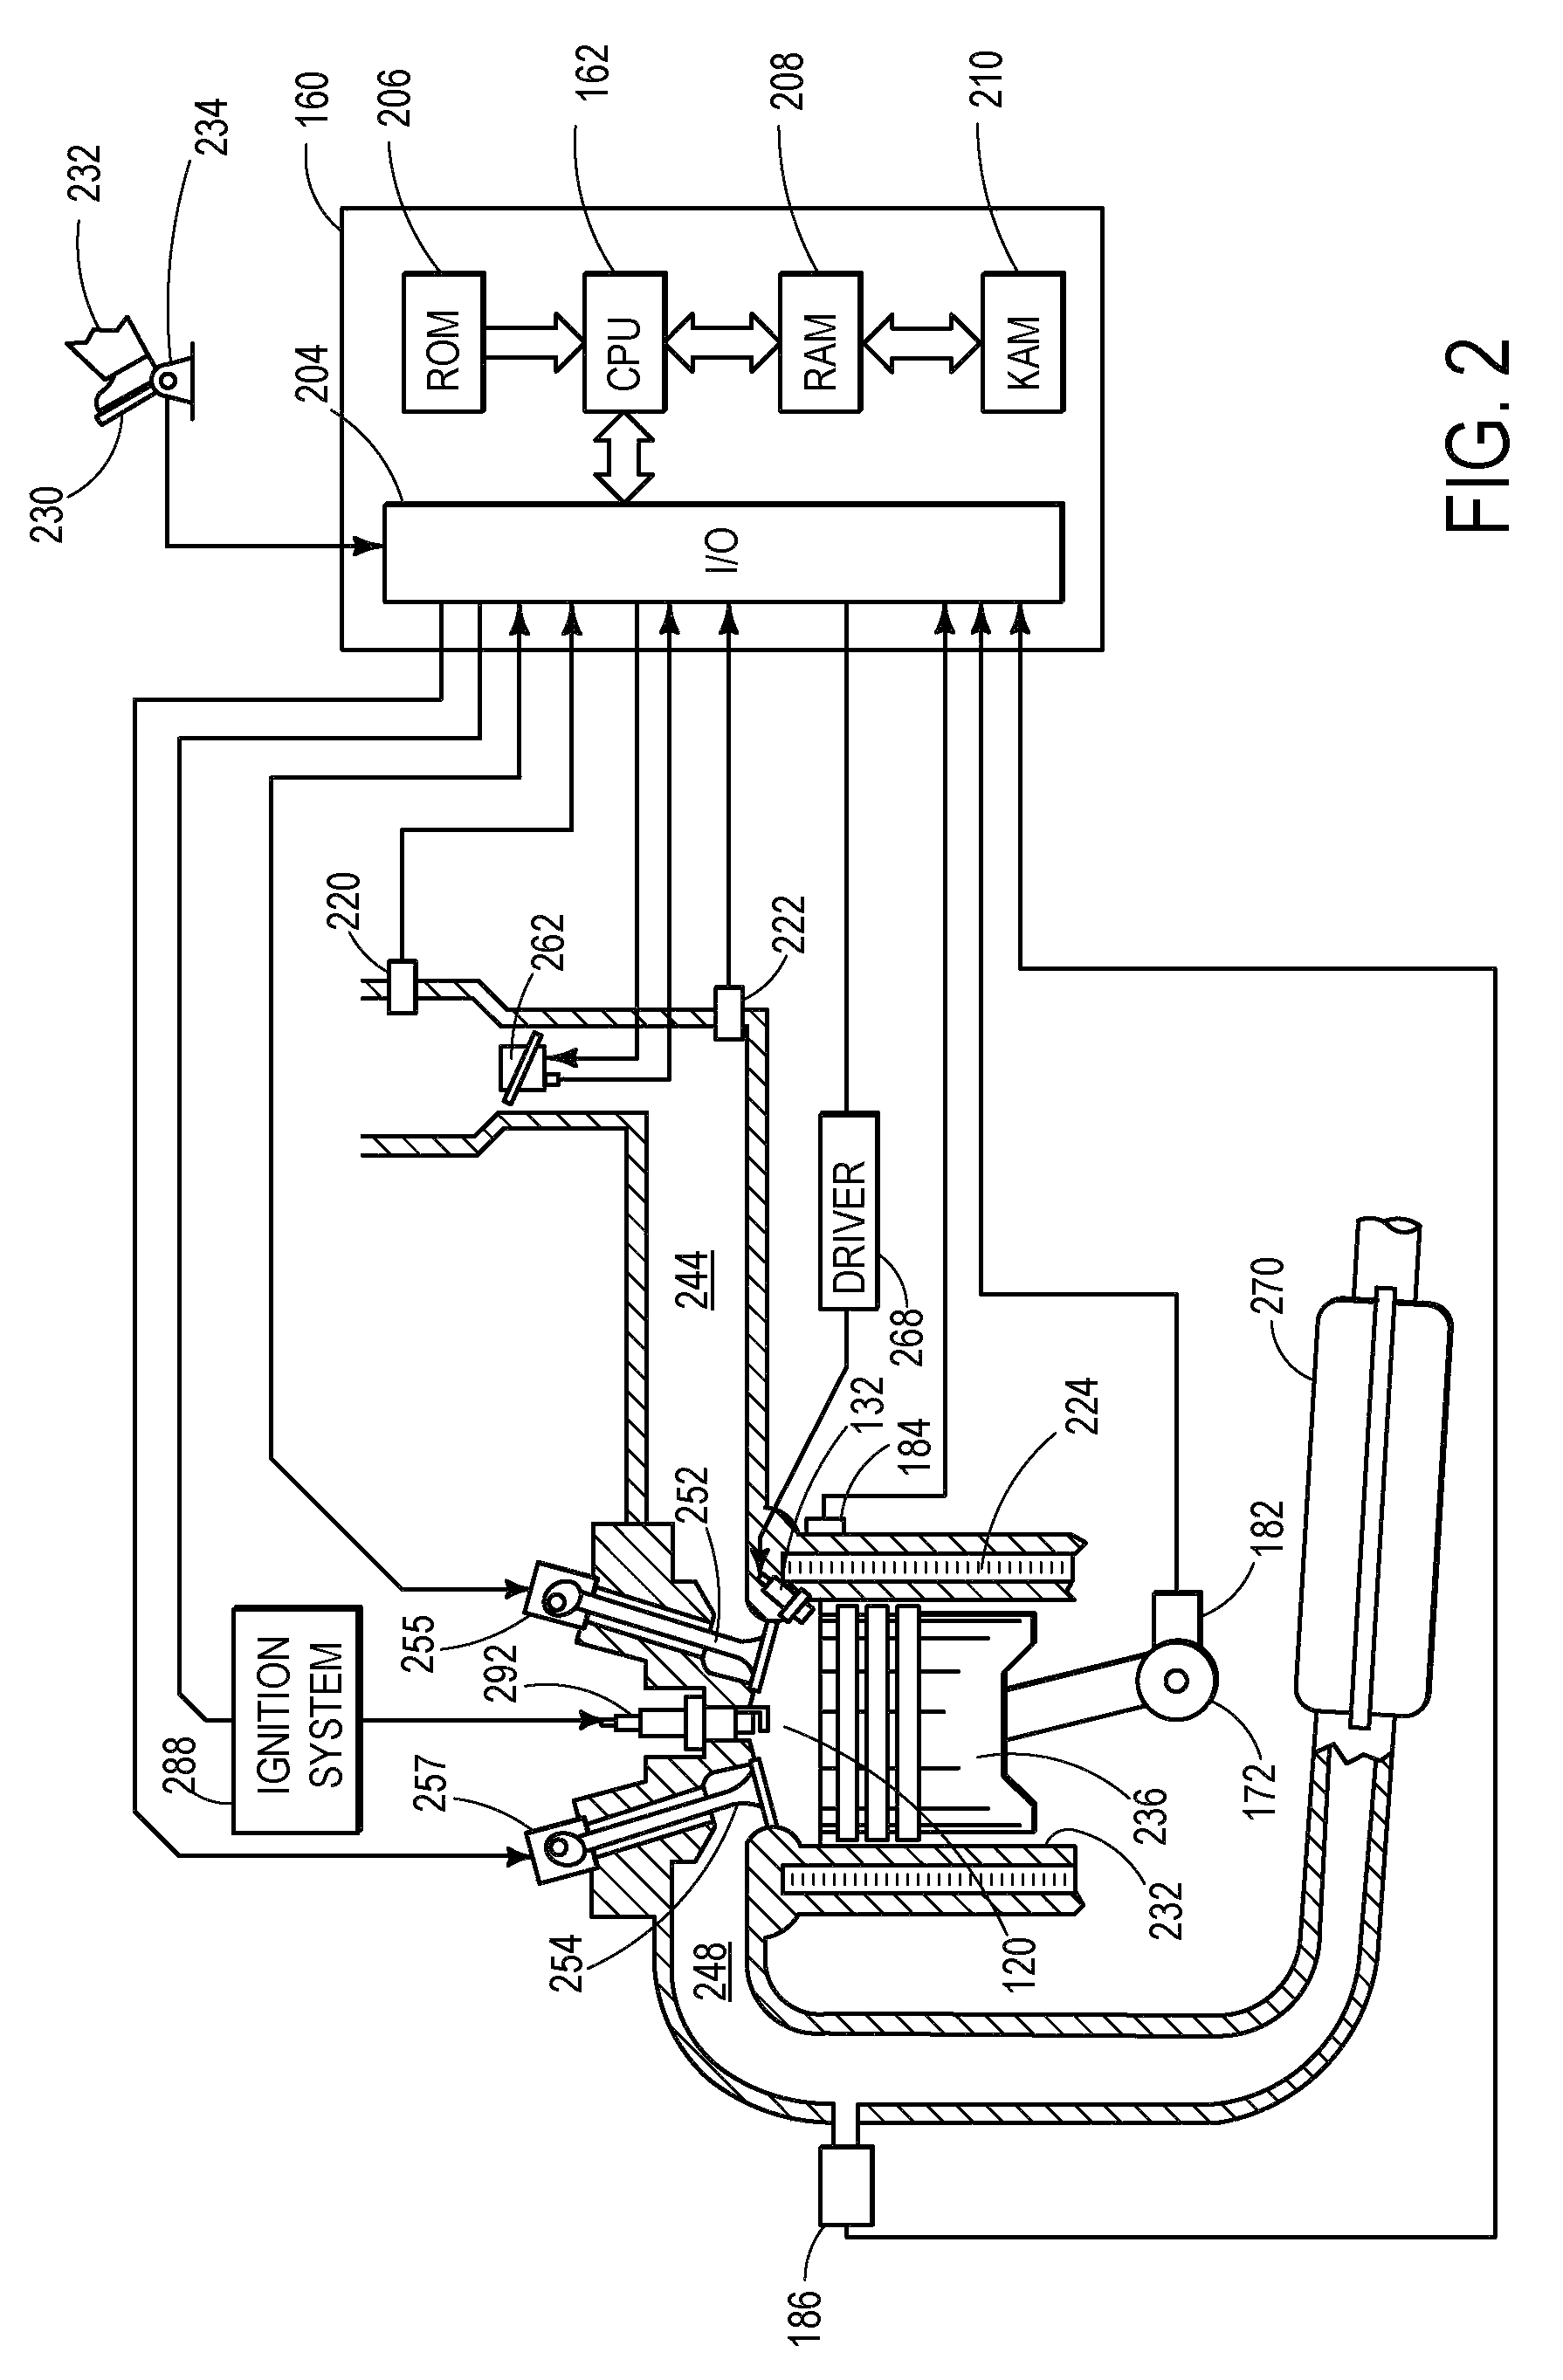 Addressing fuel pressure uncertainty during startup of a direct injection engine